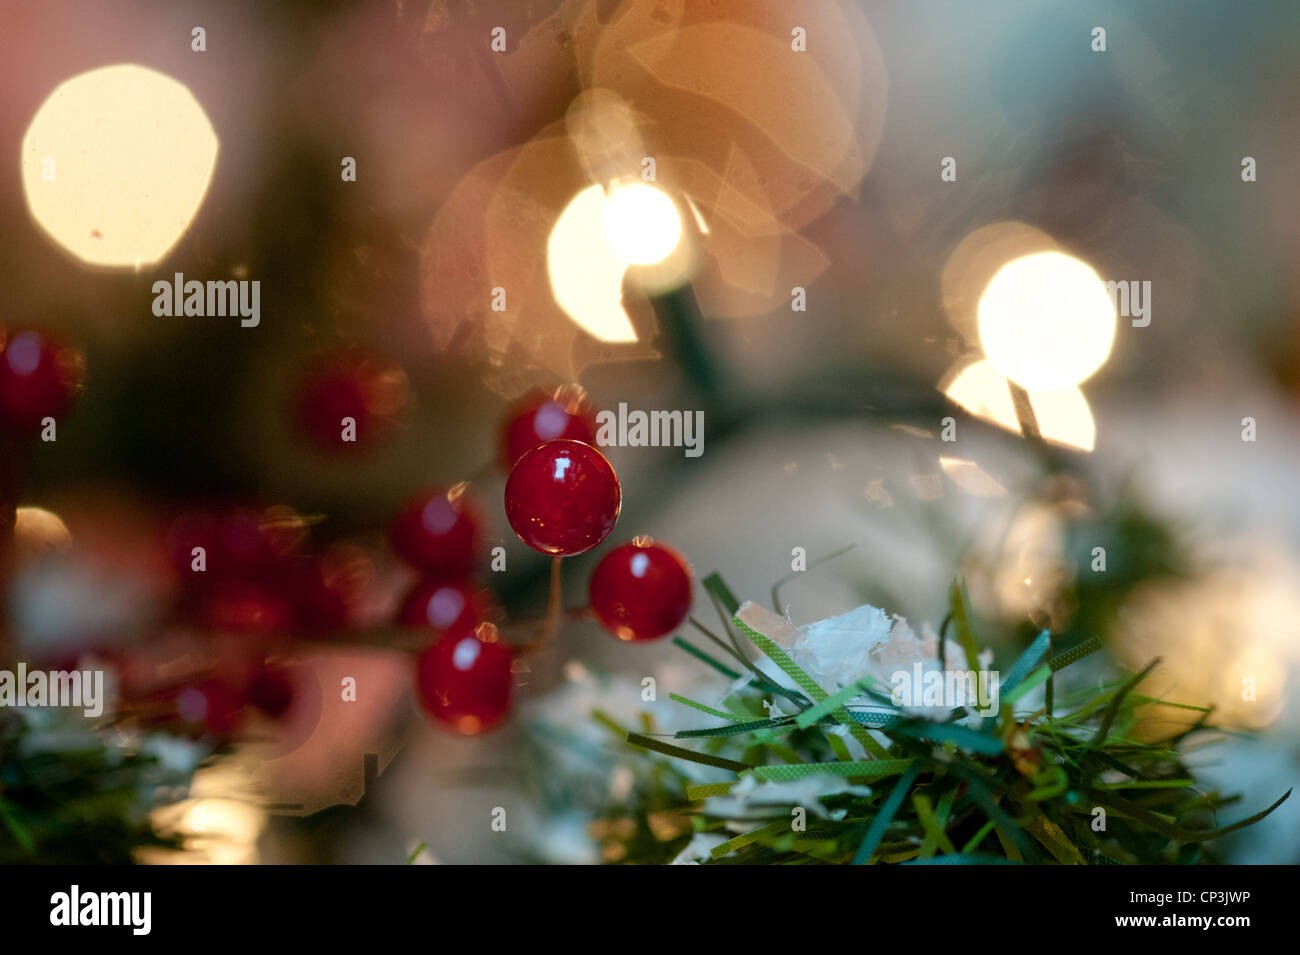 Decorative holly with lights in party decoration Stock Photo